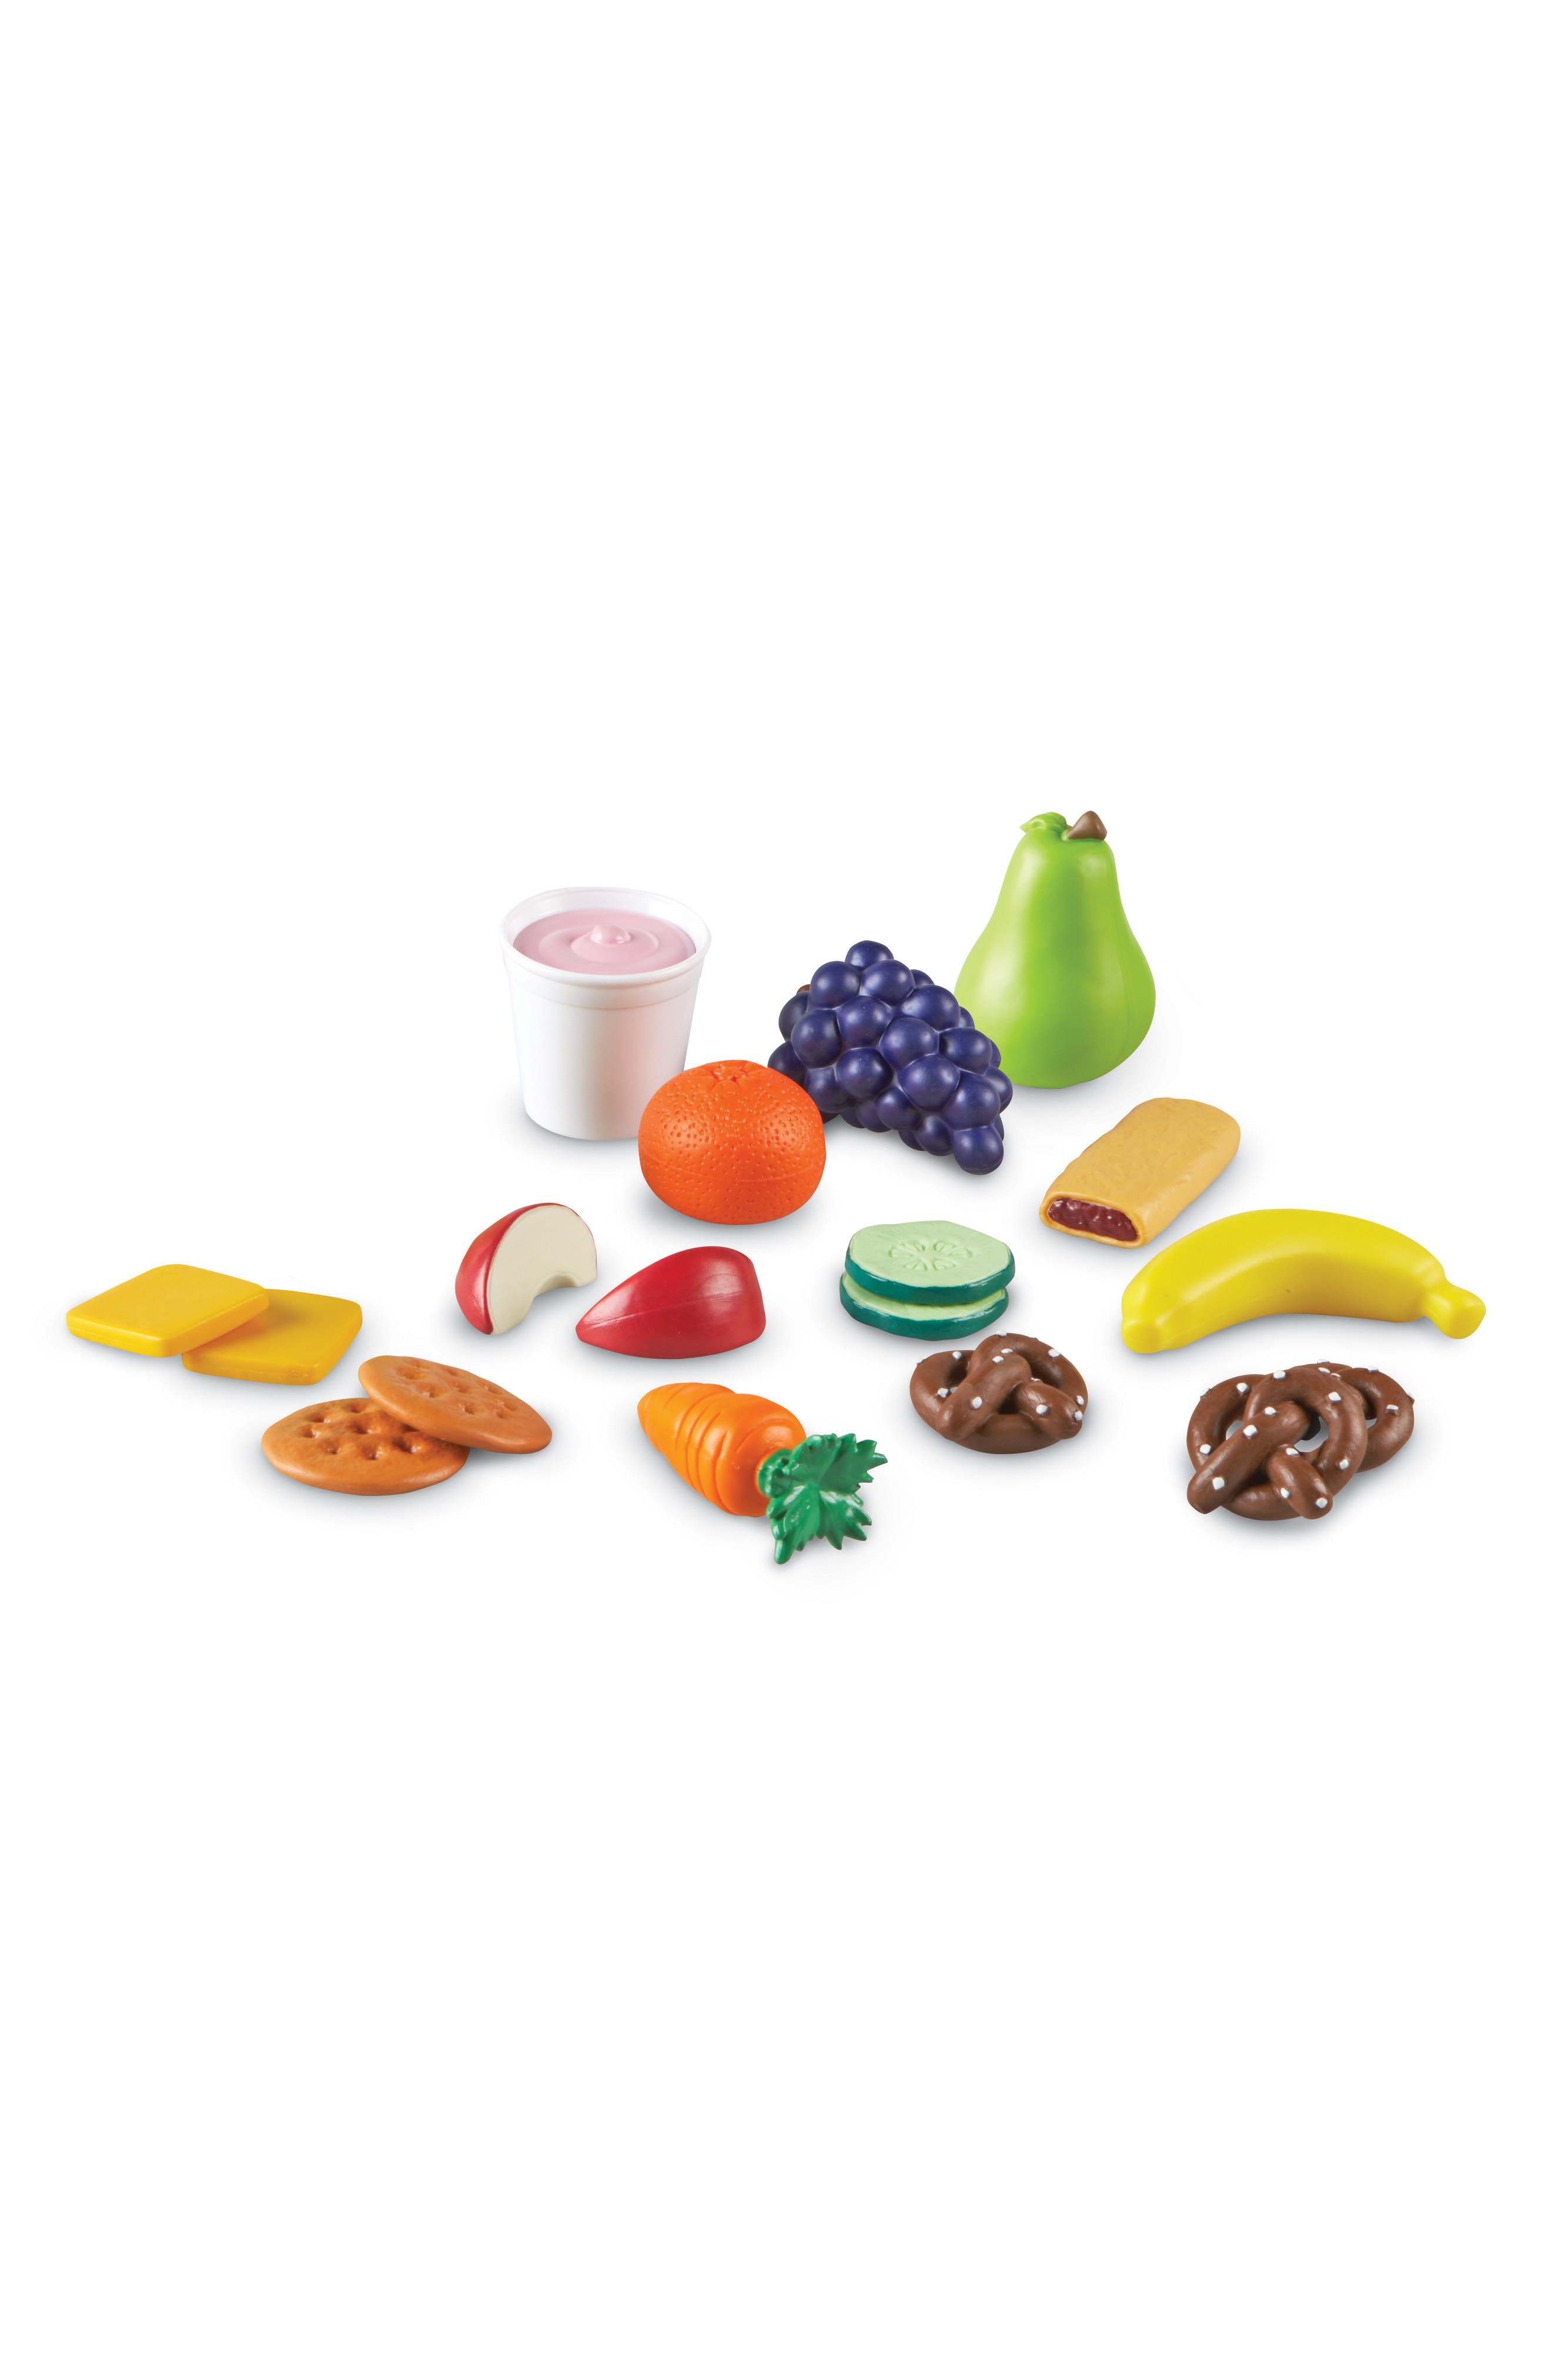 UPC 765023097443 product image for Learning Resources New Sprouts Healthy Snack Set | upcitemdb.com